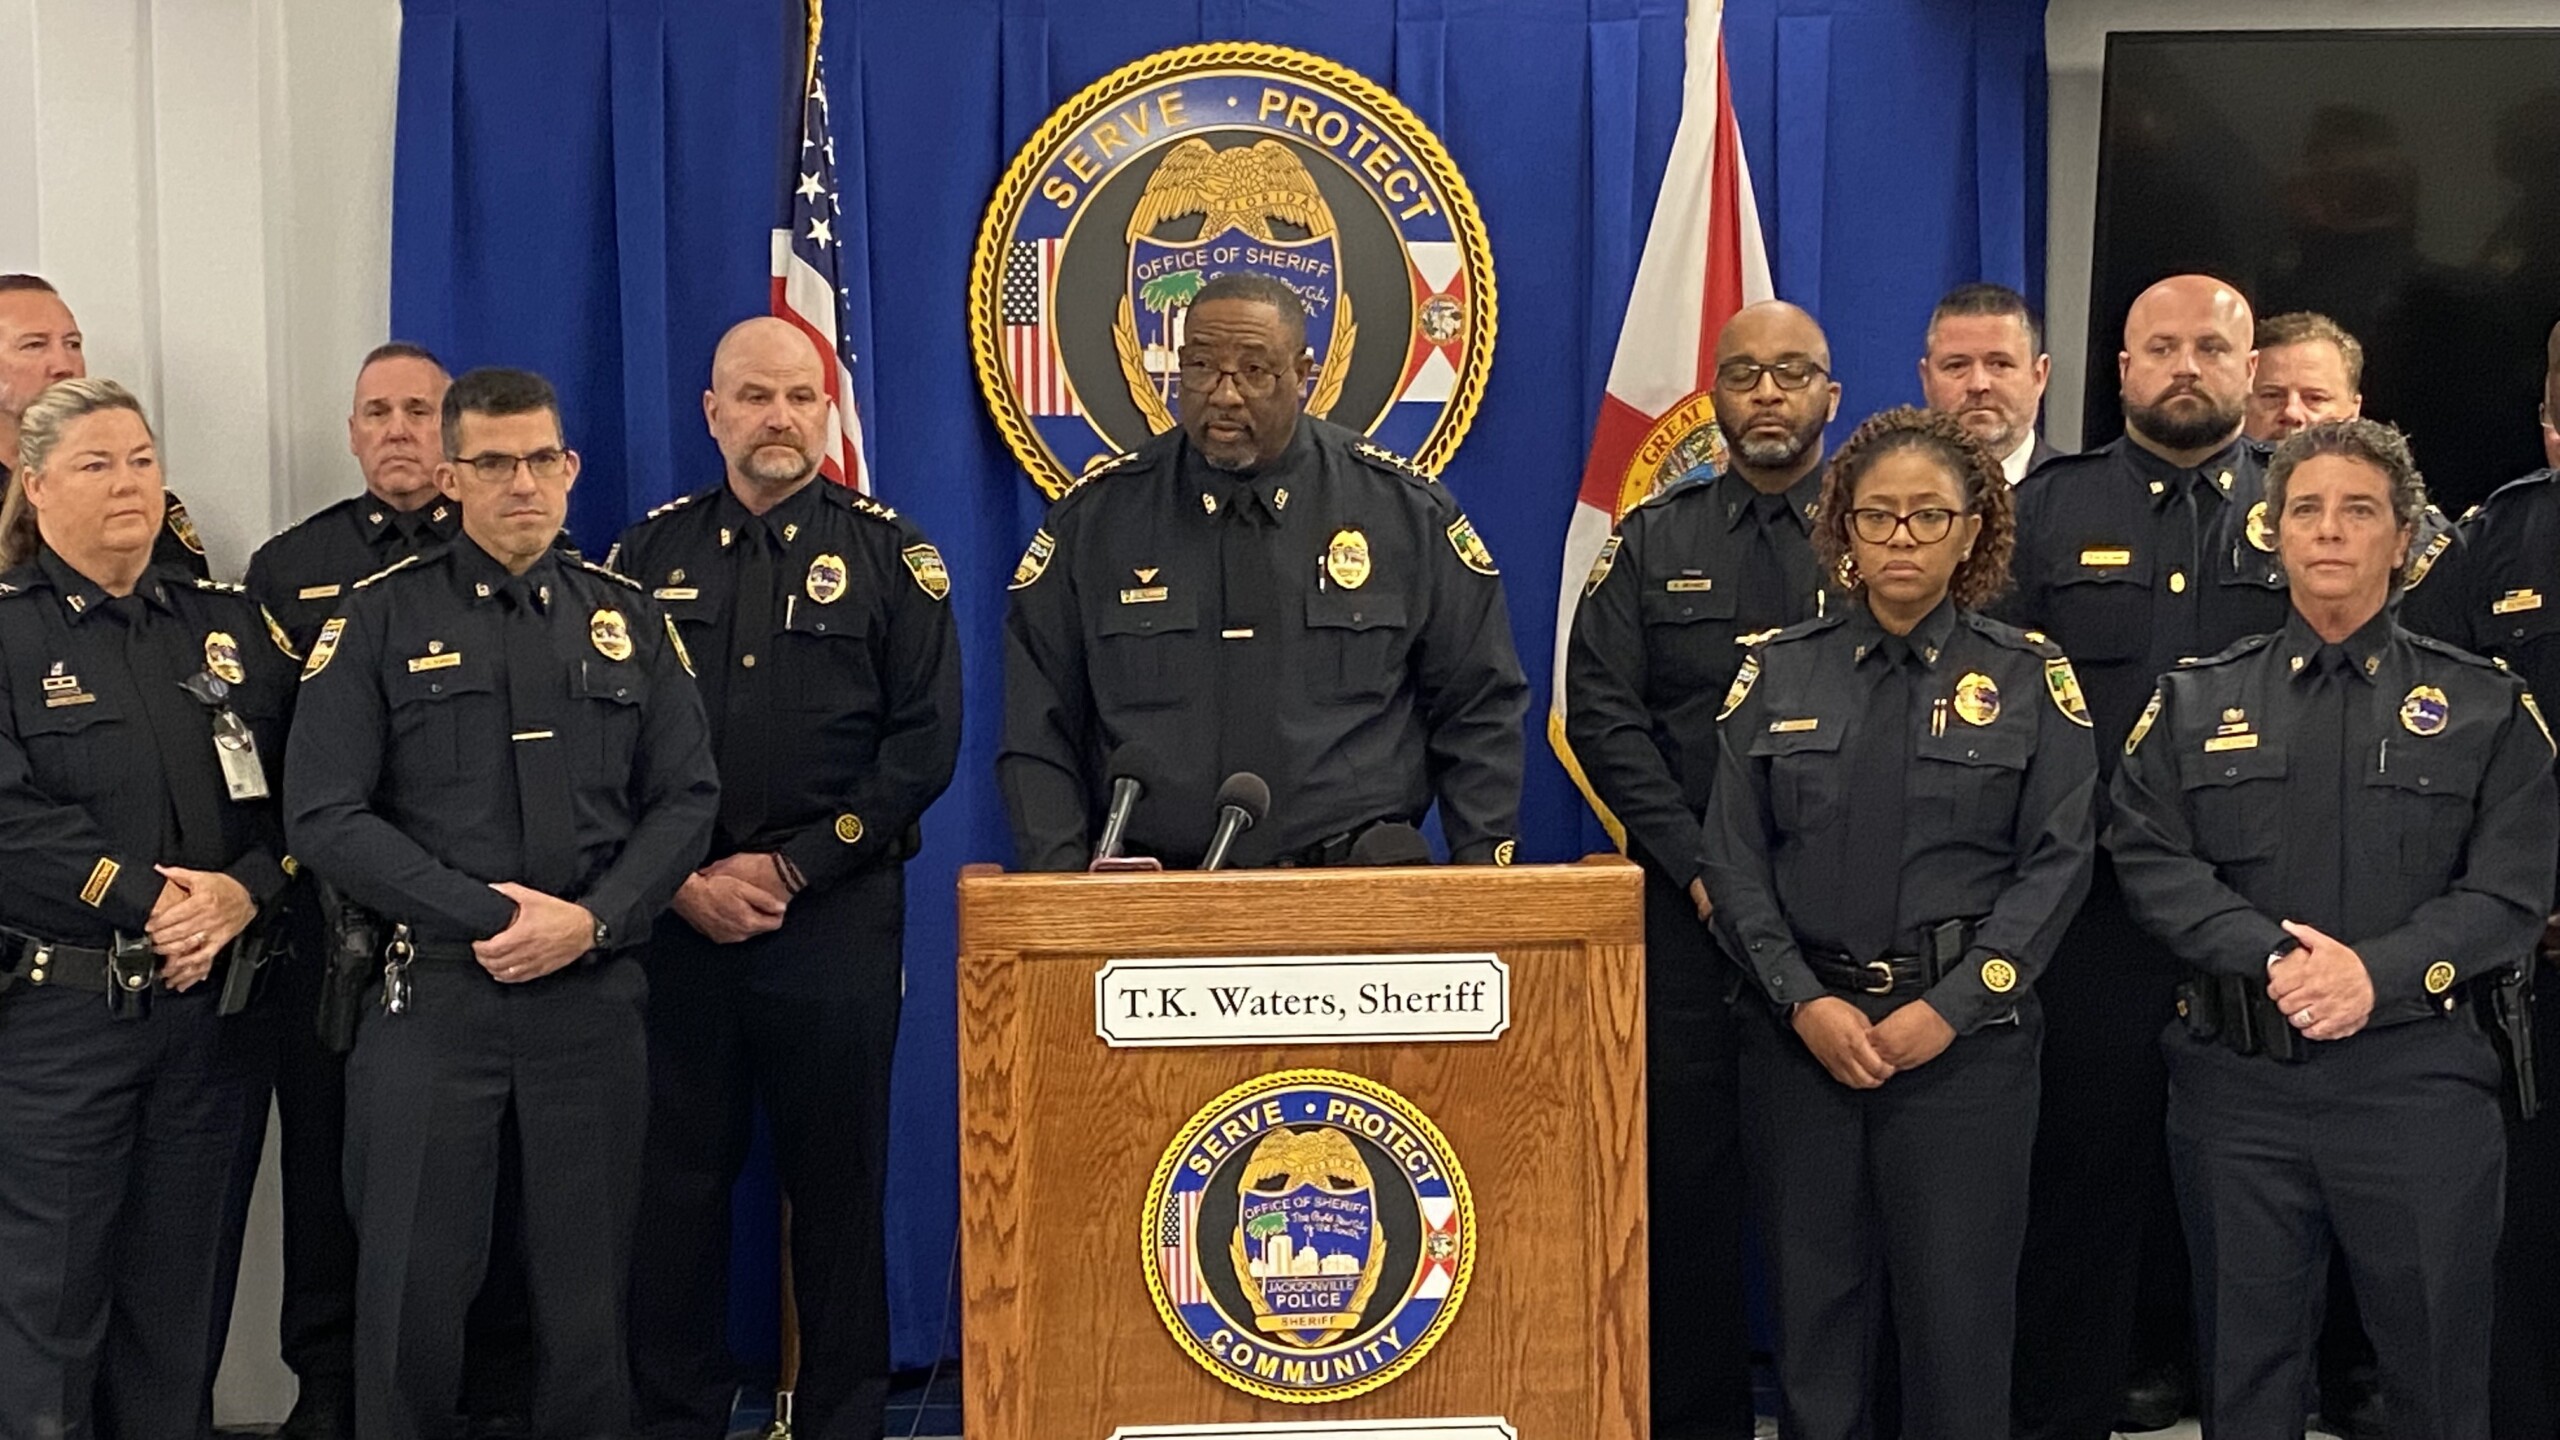 Featured image for “Sheriff T.K. Waters sets new agenda for JSO”